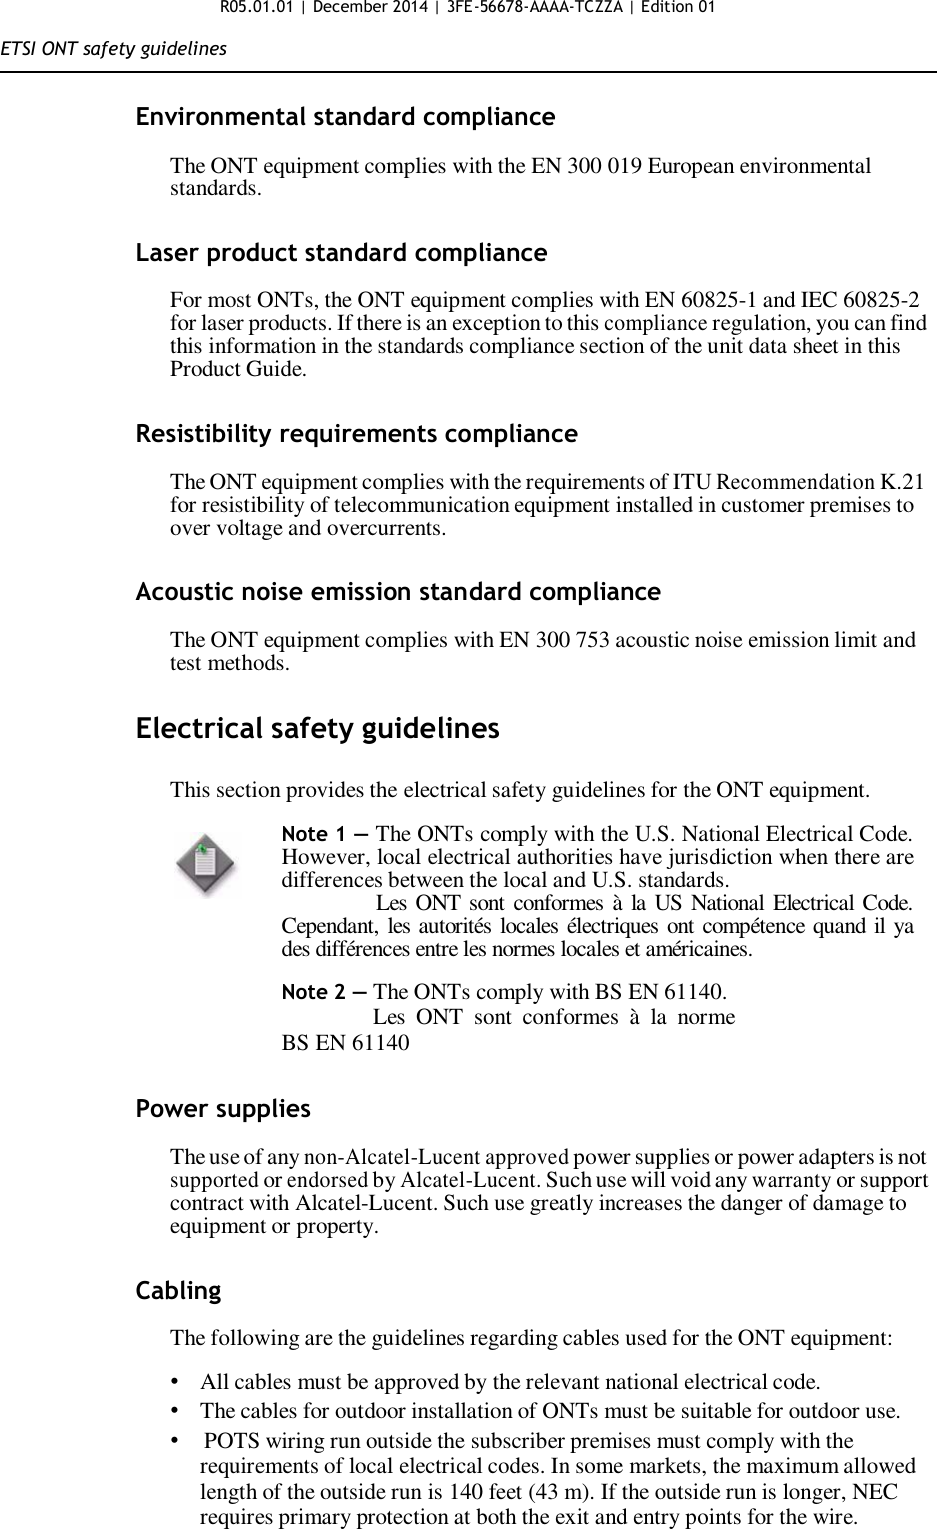 R05.01.01 | December 2014 | 3FE-56678-AAAA-TCZZA | Edition 01  ETSI ONT safety guidelines   Environmental standard compliance  The ONT equipment complies with the EN 300 019 European environmental standards.   Laser product standard compliance  For most ONTs, the ONT equipment complies with EN 60825-1 and IEC 60825-2 for laser products. If there is an exception to this compliance regulation, you can find this information in the standards compliance section of the unit data sheet in this Product Guide.   Resistibility requirements compliance  The ONT equipment complies with the requirements of ITU Recommendation K.21 for resistibility of telecommunication equipment installed in customer premises to over voltage and overcurrents.   Acoustic noise emission standard compliance  The ONT equipment complies with EN 300 753 acoustic noise emission limit and test methods.   Electrical safety guidelines  This section provides the electrical safety guidelines for the ONT equipment.  Note 1 — The ONTs comply with the U.S. National Electrical Code. However, local electrical authorities have jurisdiction when there are differences between the local and U.S. standards.                Les  ONT sont conformes  à la US National Electrical Code. Cependant, les autorités locales électriques ont compétence quand il ya des différences entre les normes locales et américaines.  Note 2 — The ONTs comply with BS EN 61140. Les  ONT  sont  conformes  à  la  norme BS EN 61140   Power supplies  The use of any non-Alcatel-Lucent approved power supplies or power adapters is not supported or endorsed by Alcatel-Lucent. Such use will void any warranty or support contract with Alcatel-Lucent. Such use greatly increases the danger of damage to equipment or property.   Cabling  The following are the guidelines regarding cables used for the ONT equipment:  • All cables must be approved by the relevant national electrical code. • The cables for outdoor installation of ONTs must be suitable for outdoor use. •   POTS wiring run outside the subscriber premises must comply with the requirements of local electrical codes. In some markets, the maximum allowed length of the outside run is 140 feet (43 m). If the outside run is longer, NEC requires primary protection at both the exit and entry points for the wire.  